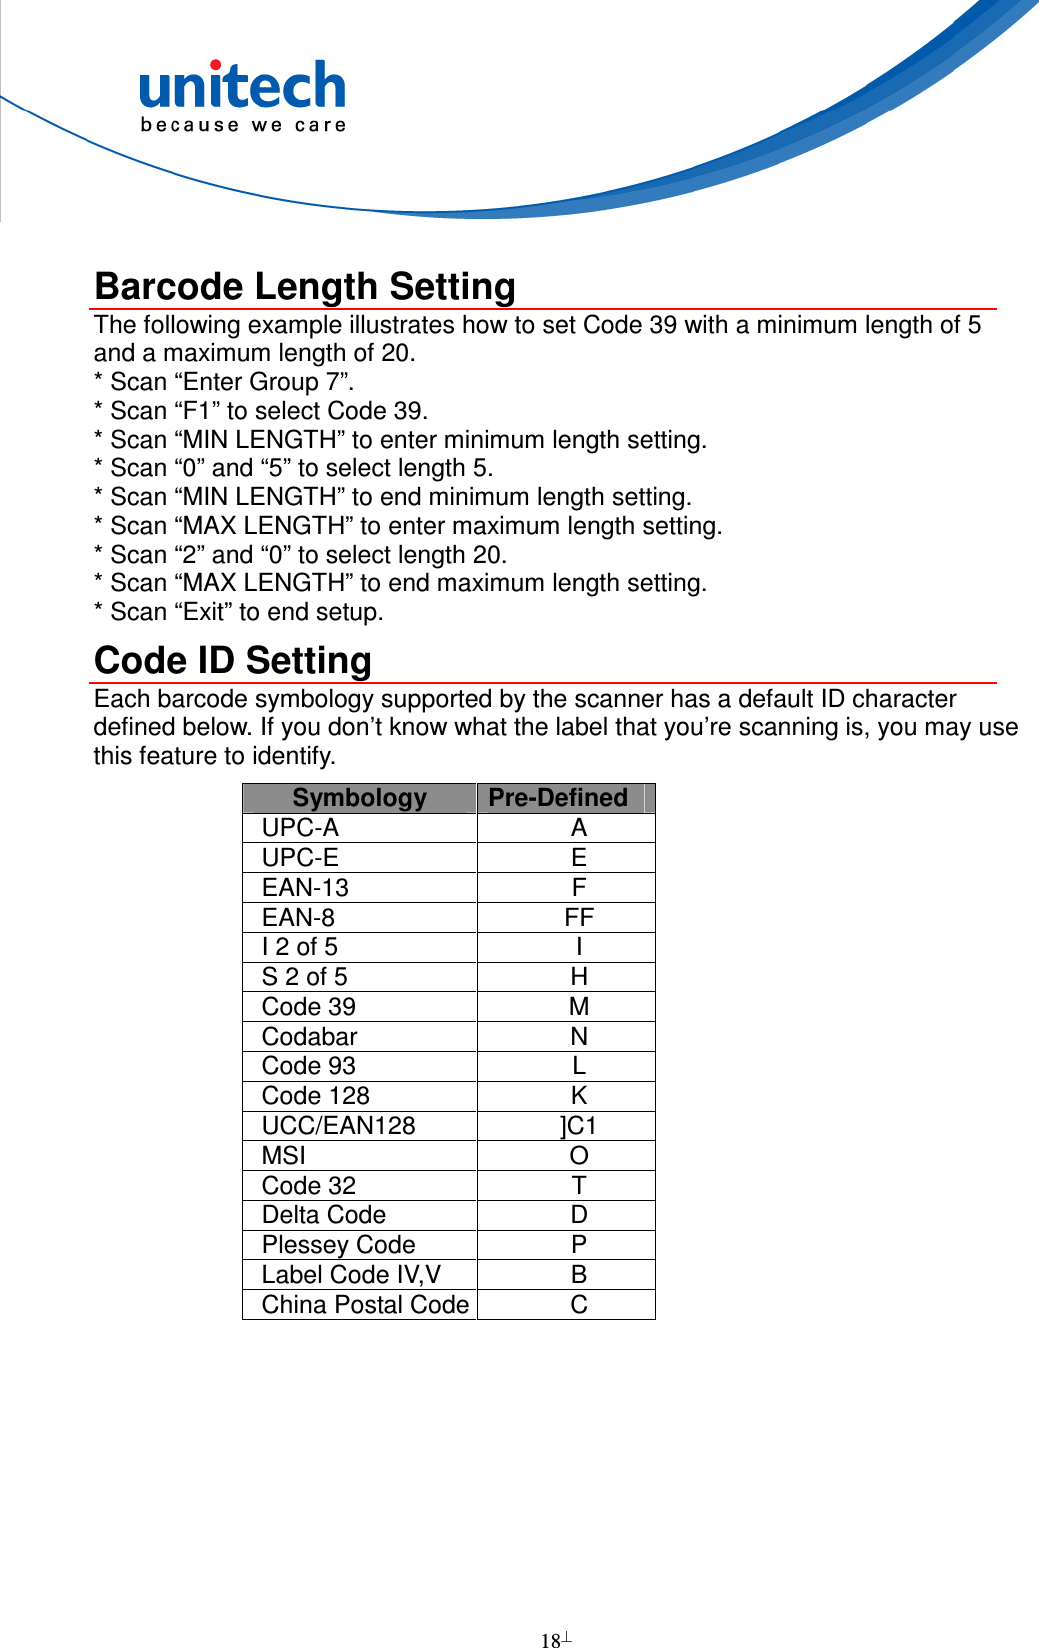  18   Barcode Length Setting The following example illustrates how to set Code 39 with a minimum length of 5 and a maximum length of 20. * Scan “Enter Group 7”. * Scan “F1” to select Code 39. * Scan “MIN LENGTH” to enter minimum length setting. * Scan “0” and “5” to select length 5. * Scan “MIN LENGTH” to end minimum length setting. * Scan “MAX LENGTH” to enter maximum length setting. * Scan “2” and “0” to select length 20. * Scan “MAX LENGTH” to end maximum length setting. * Scan “Exit” to end setup. Code ID Setting Each barcode symbology supported by the scanner has a default ID character defined below. If you don’t know what the label that you’re scanning is, you may use this feature to identify. Symbology  Pre-Defined UPC-A  A UPC-E  E EAN-13  F EAN-8  FF I 2 of 5  I S 2 of 5  H Code 39  M Codabar  N Code 93  L Code 128  K UCC/EAN128  ]C1 MSI  O Code 32  T Delta Code  D Plessey Code  P Label Code IV,V  B China Postal Code C 